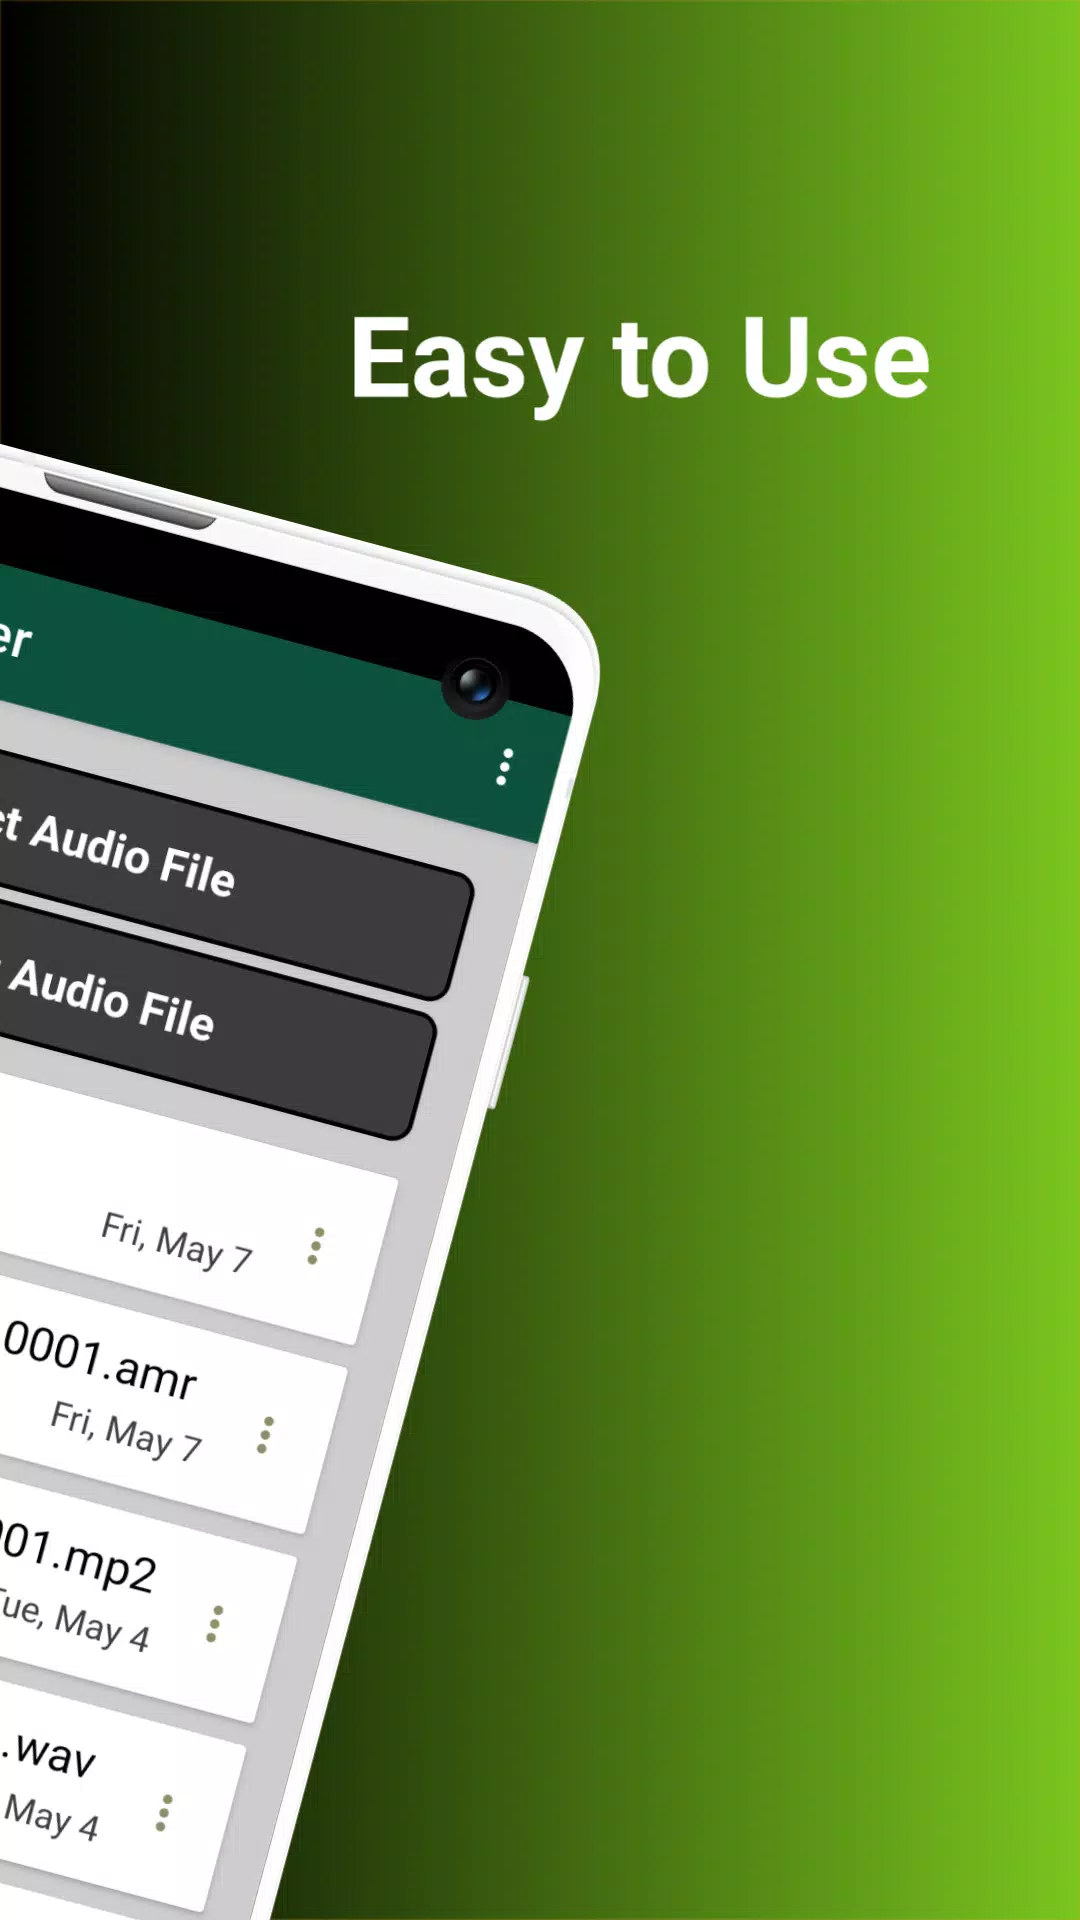 Audio Converter To Any Format Apk For Android Download